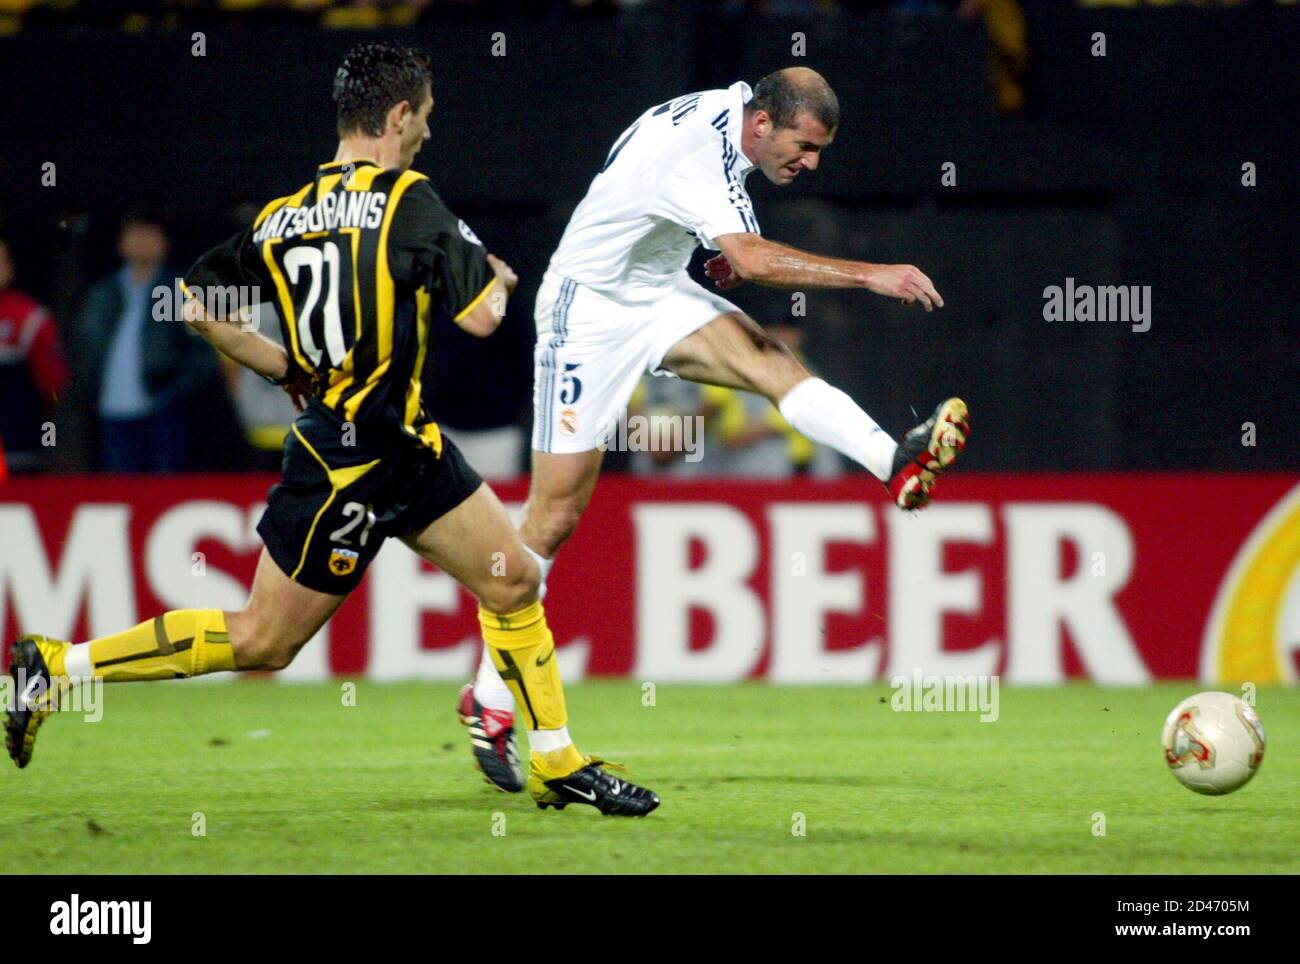 Zinedine Zidane Of Real Madrid R Scores The First Goal For His Team As Defender Kostantinos